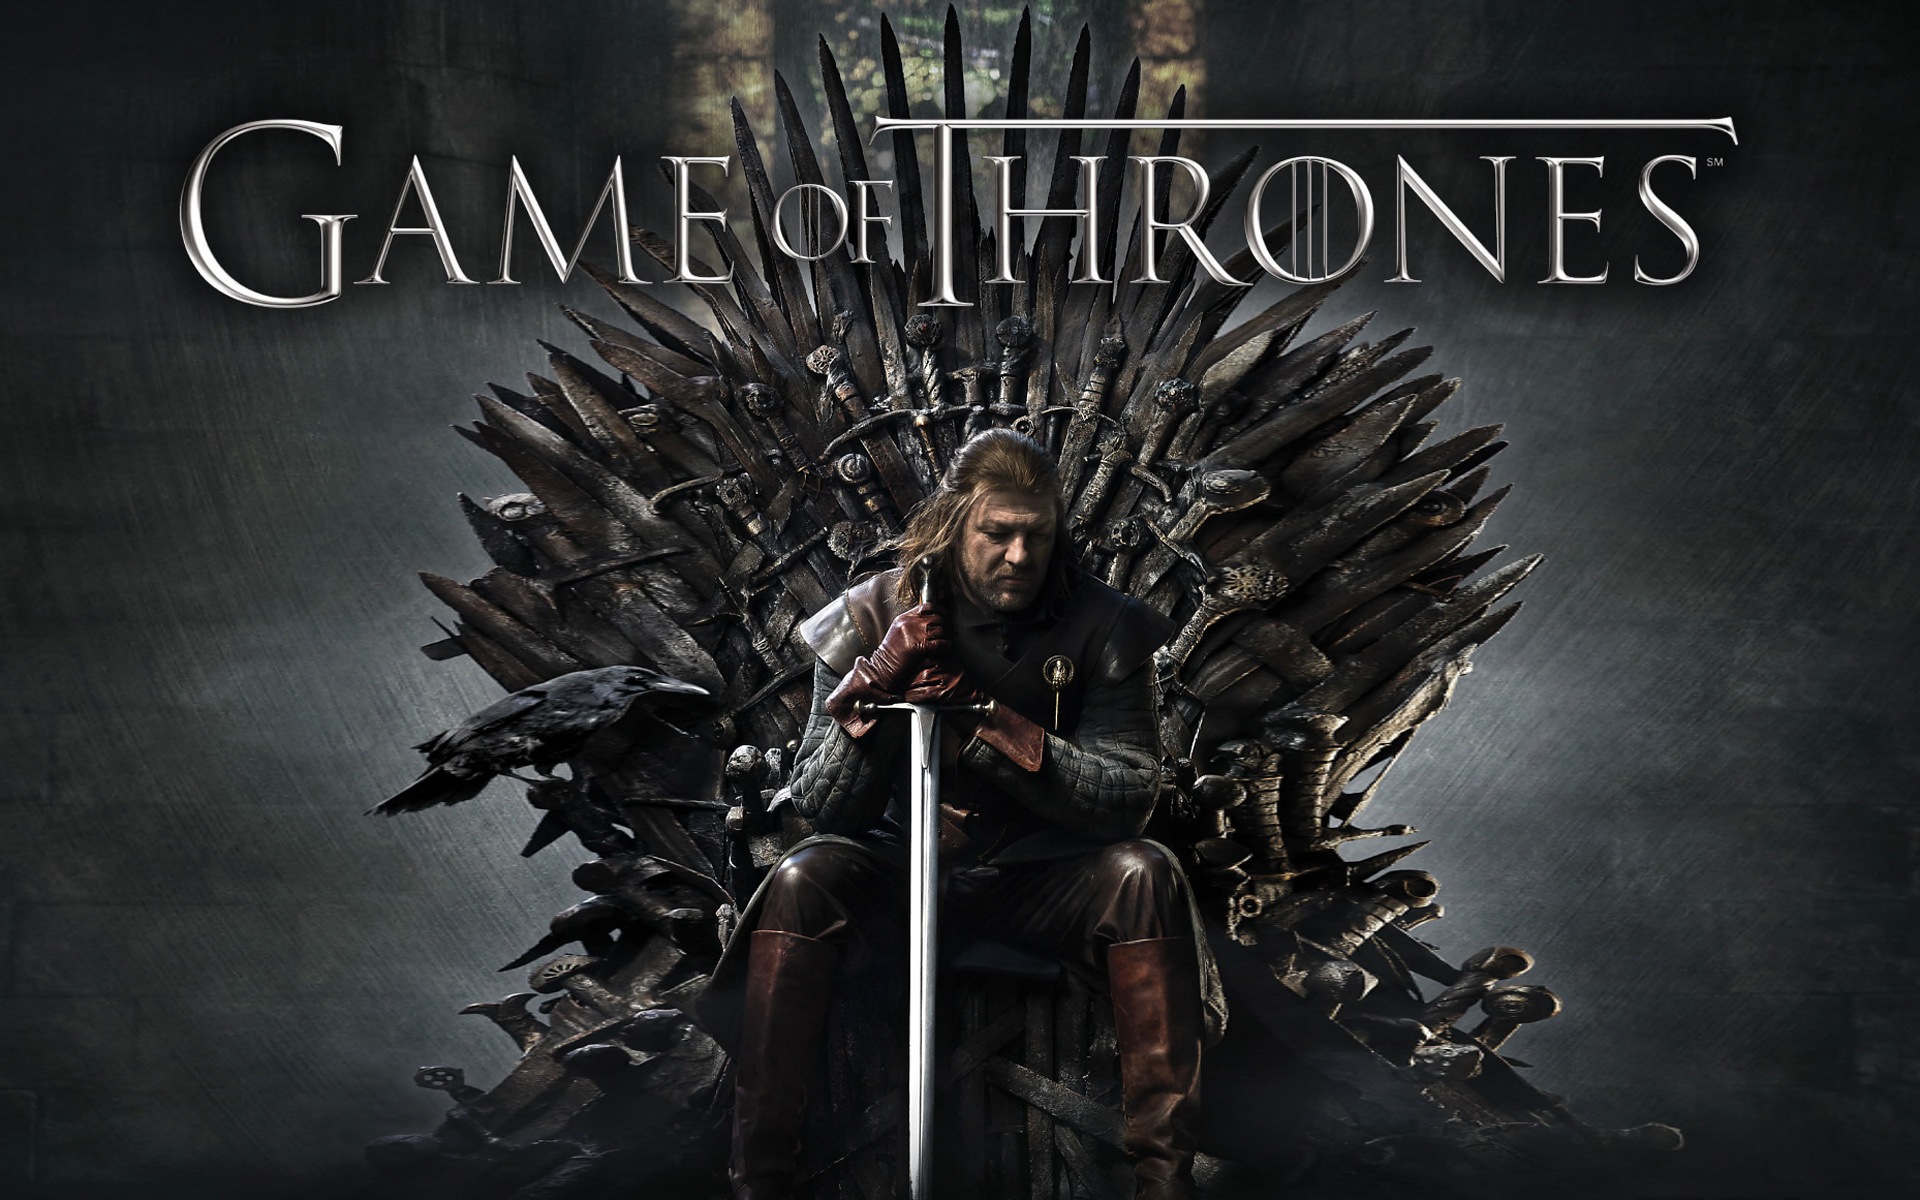 A Song of Ice and Fire: Game of Thrones 冰與火之歌：權力的遊戲高清壁紙 #6 - 1920x1200